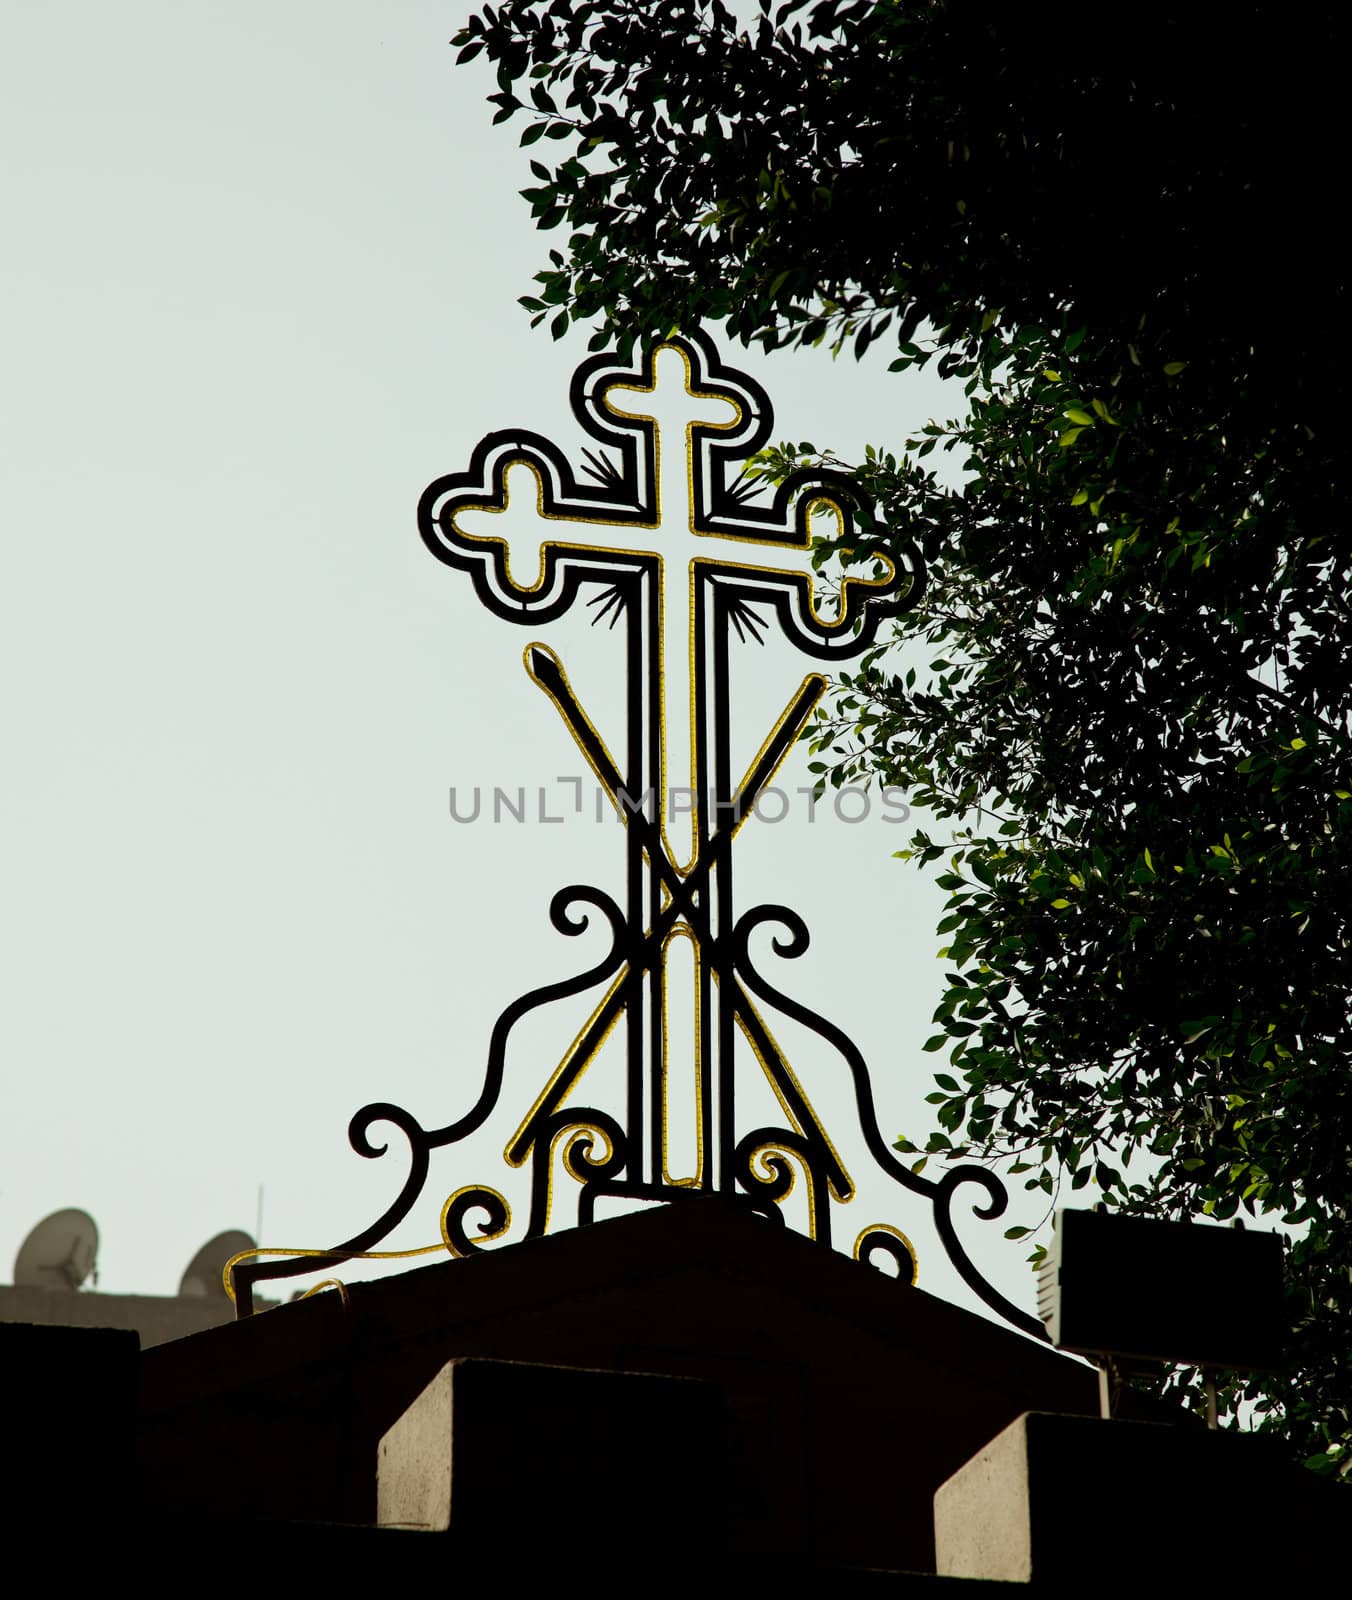 Coptic Christian cross in Cairo by steheap